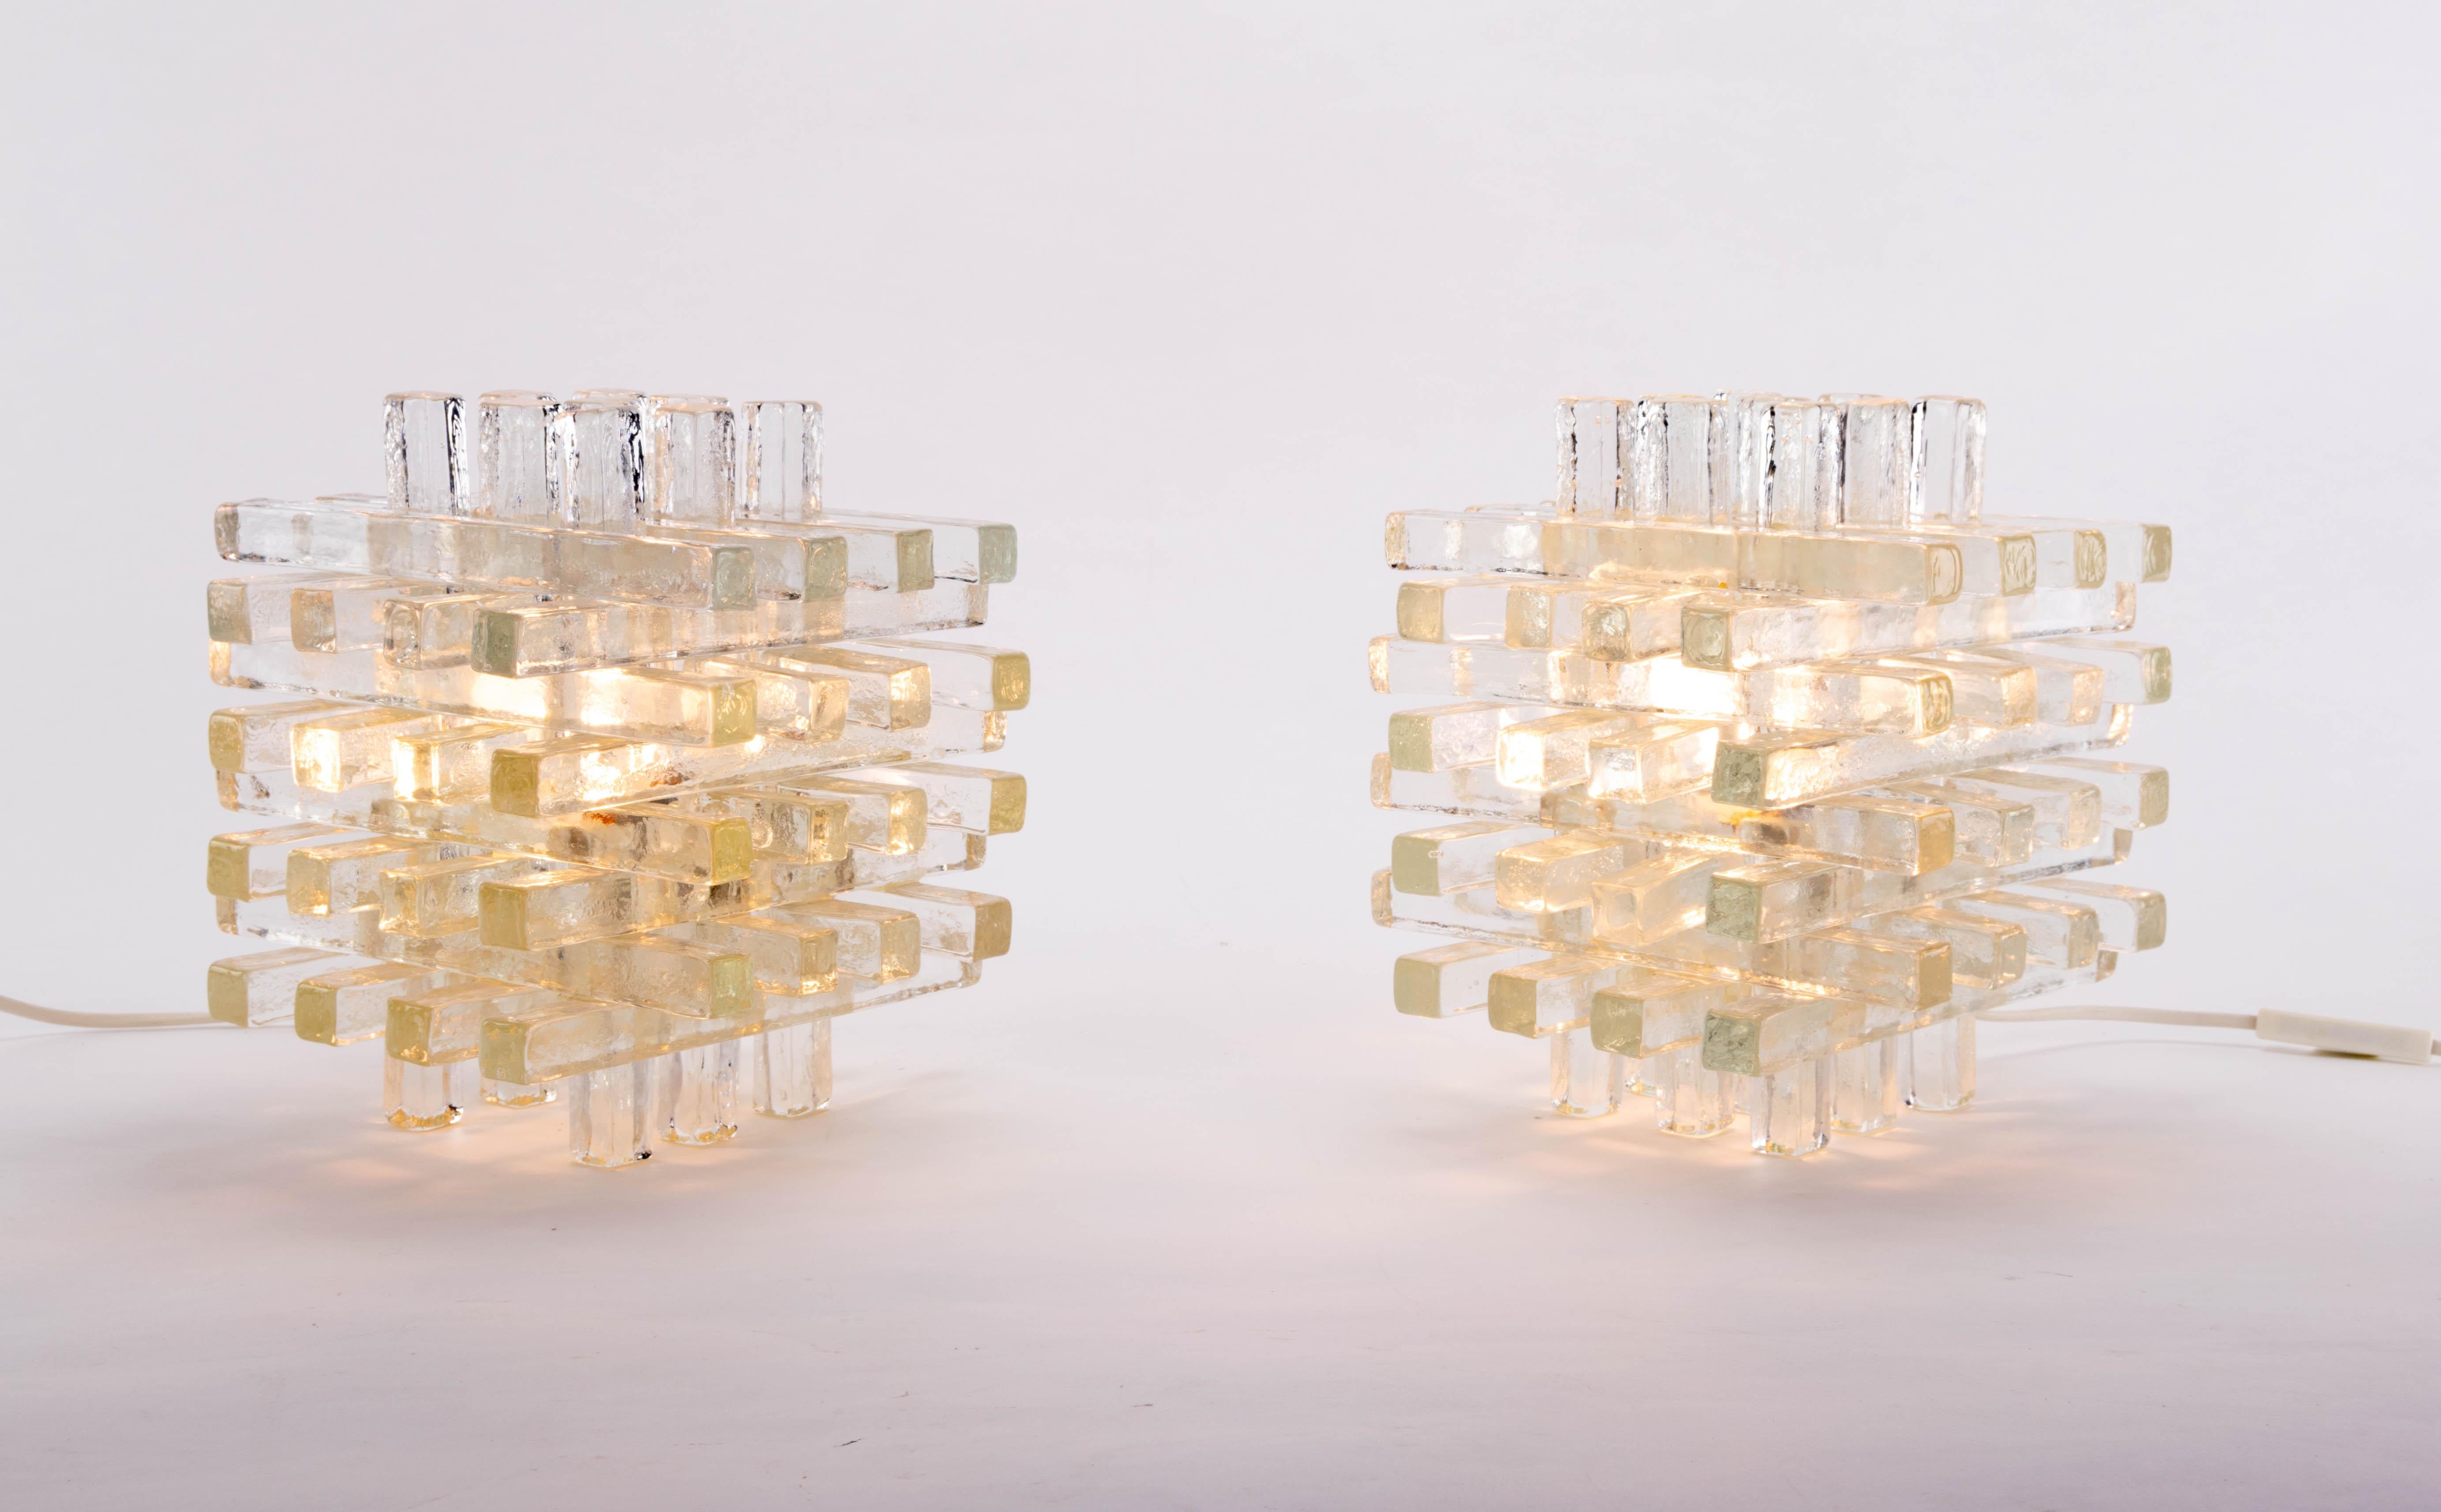 Set of two table lamps designed by Albano Poli for Poliarte Italia in the 1968. Made of hand blown Murano glass. Cubic shape consisting of glass segments with interwoven rectangular reliefs. When illuminated, the piece casts a warm golden glow and